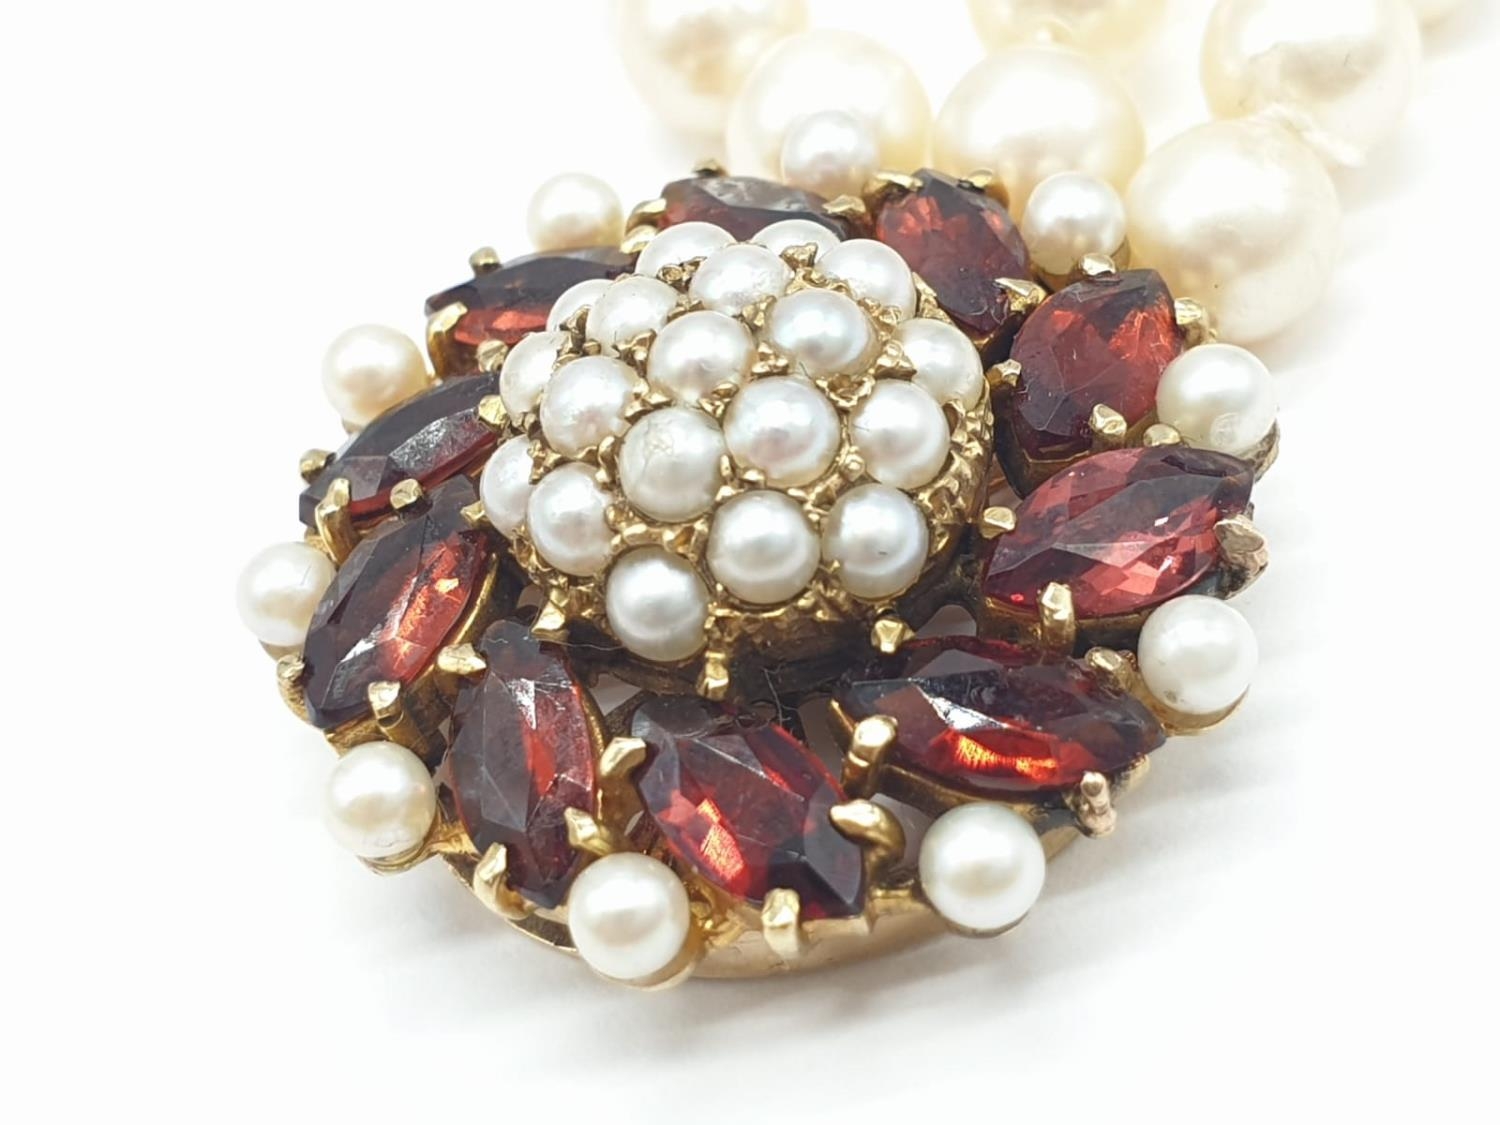 Triple row Pearl and Garnet BRACELET with 9ct Gold Clasp. 37.3g 18cm - Image 6 of 16